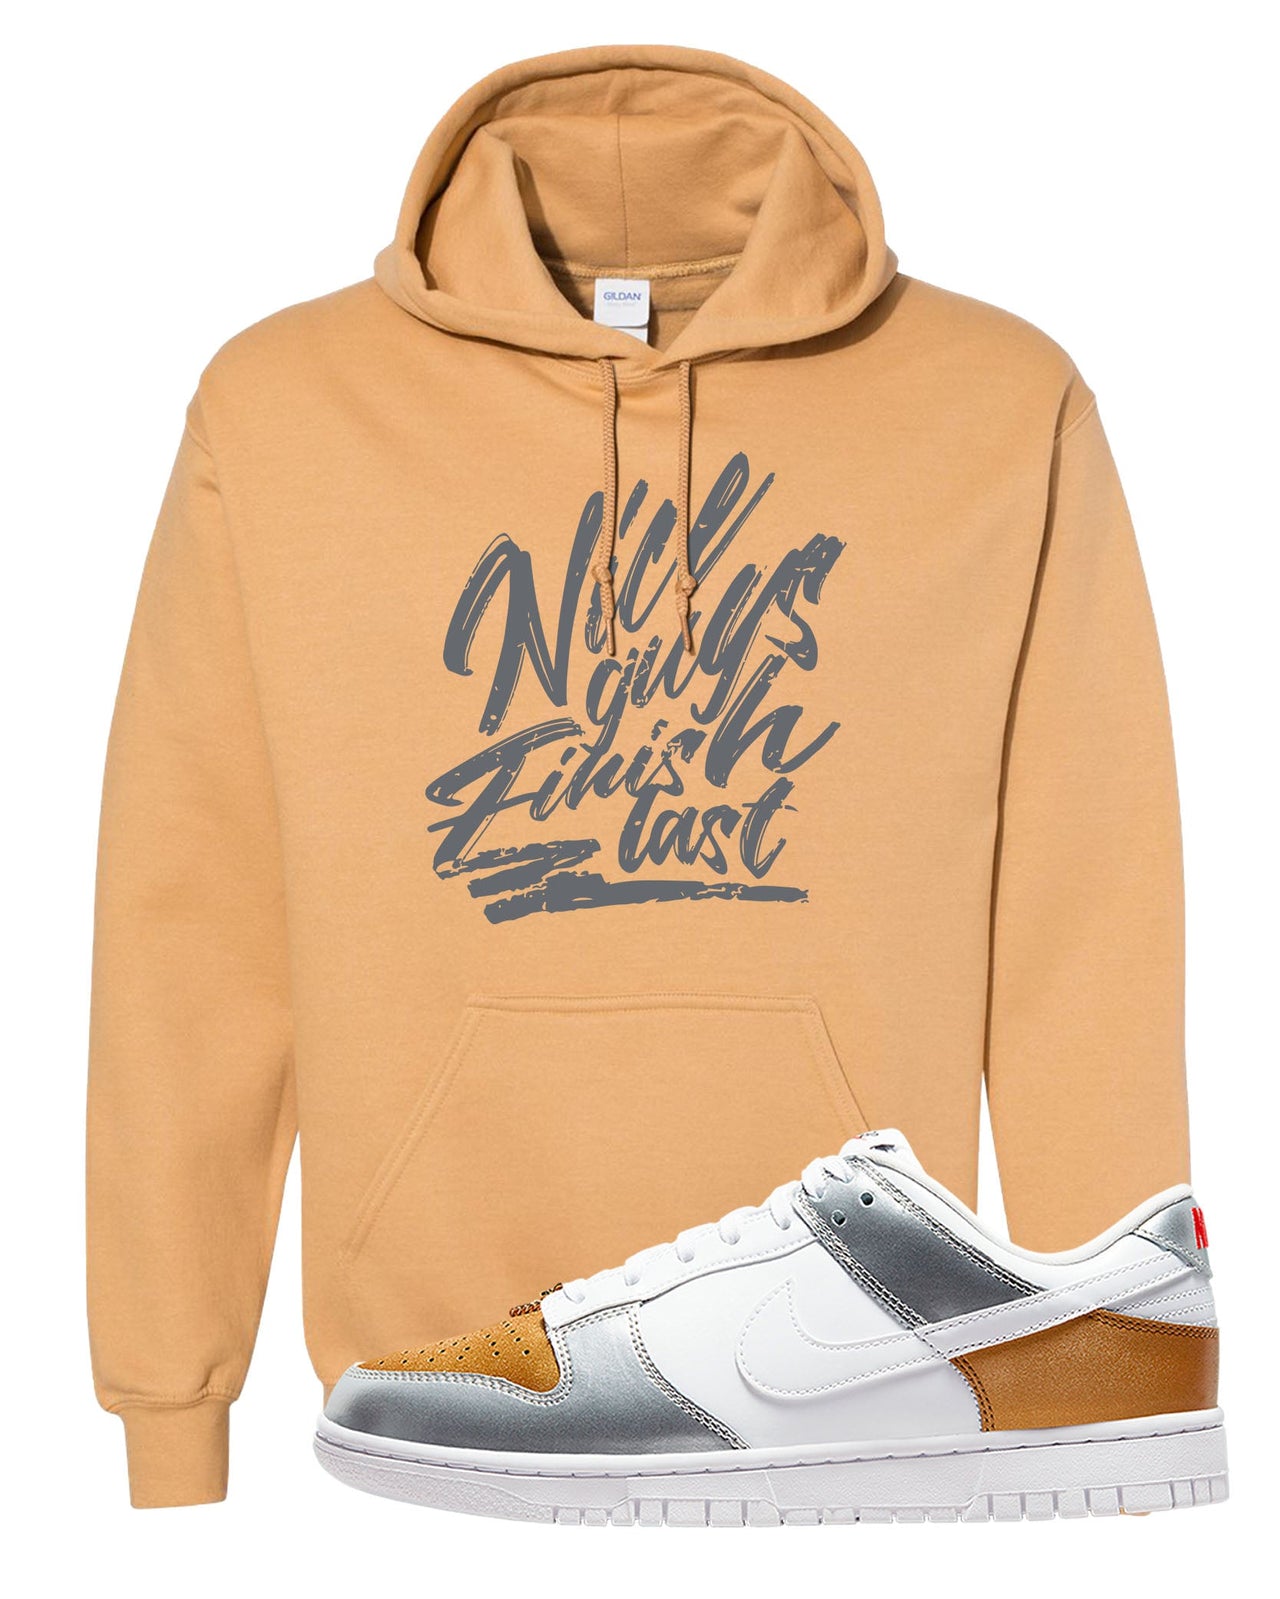 Gold Silver Red Low Dunks Hoodie | Nice Guys Finish Last, Old Gold